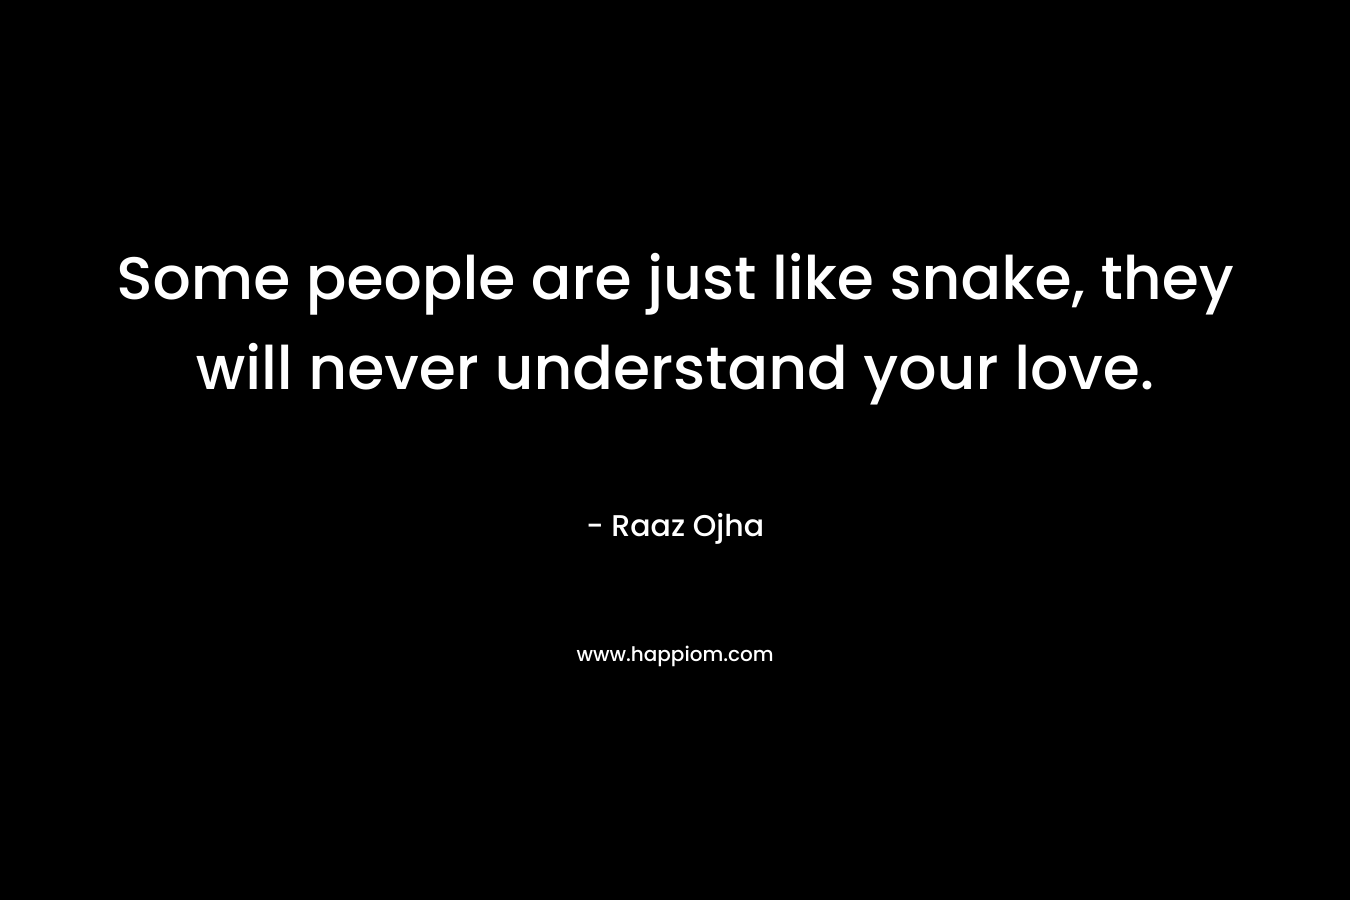 Some people are just like snake, they will never understand your love.